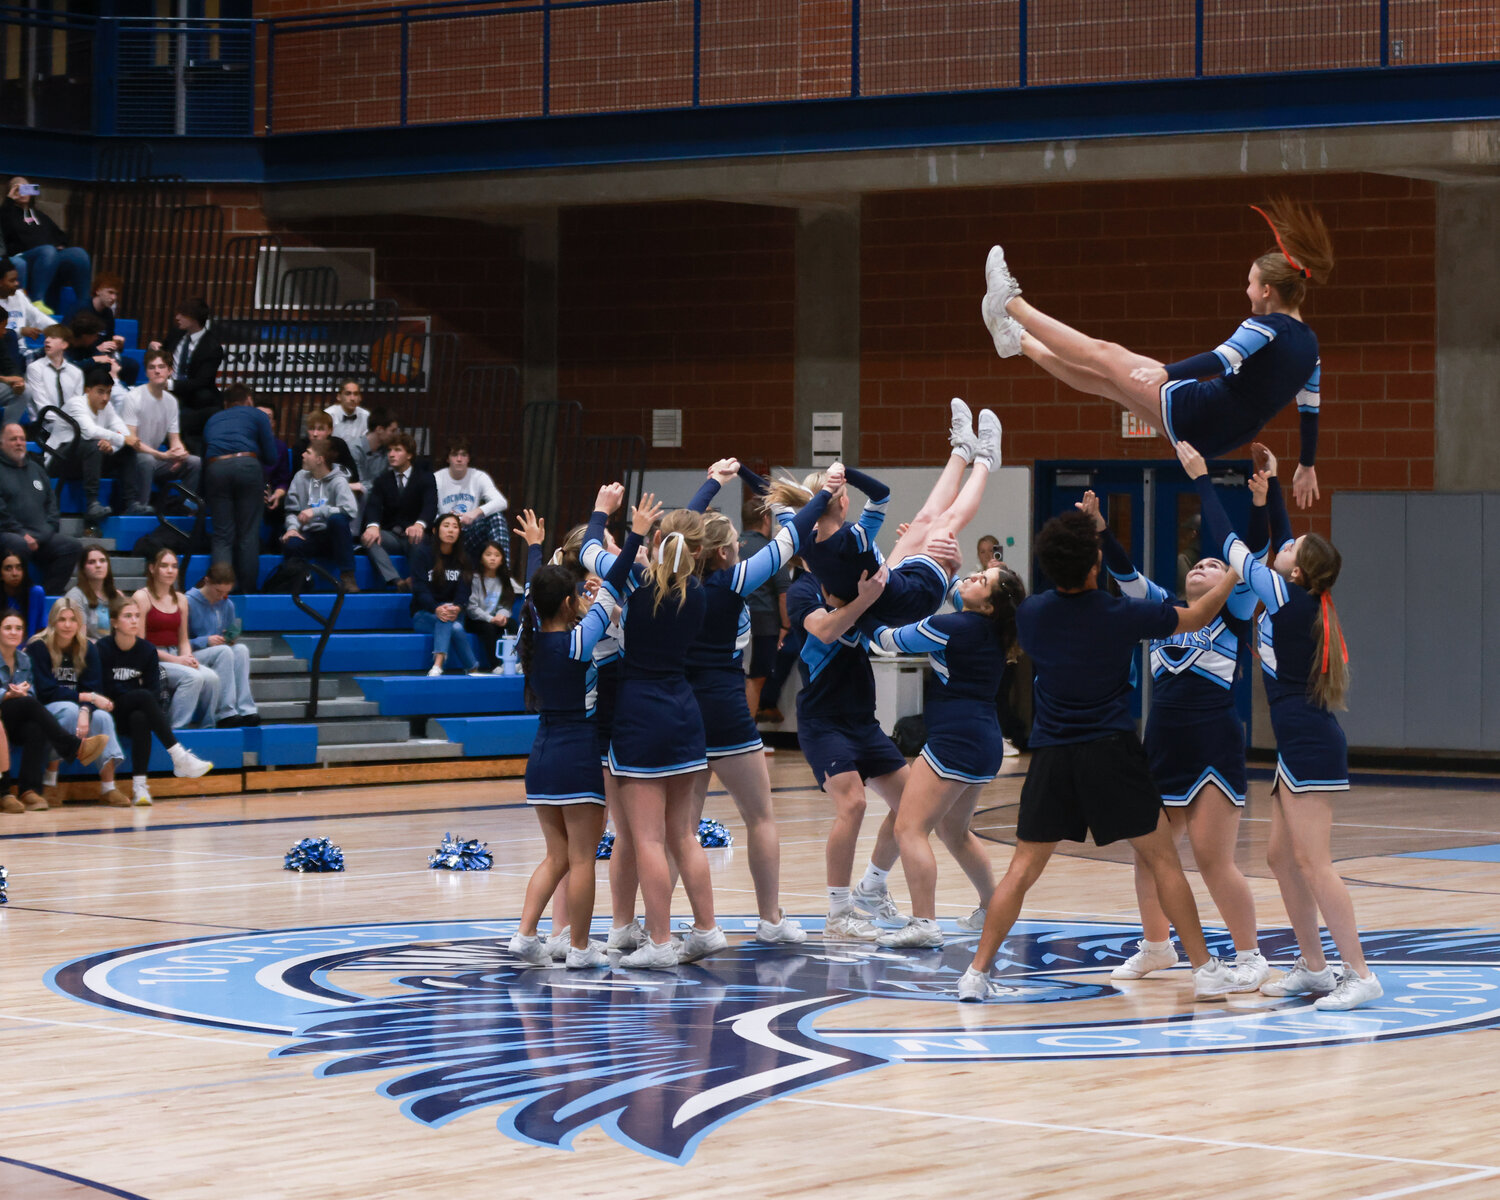 The Hockinson Hawks’ cheer squad performs during the two varsity basketball games against Tenison Woods College from Mount Gambier, Australia, on Thursday, Nov. 30. 